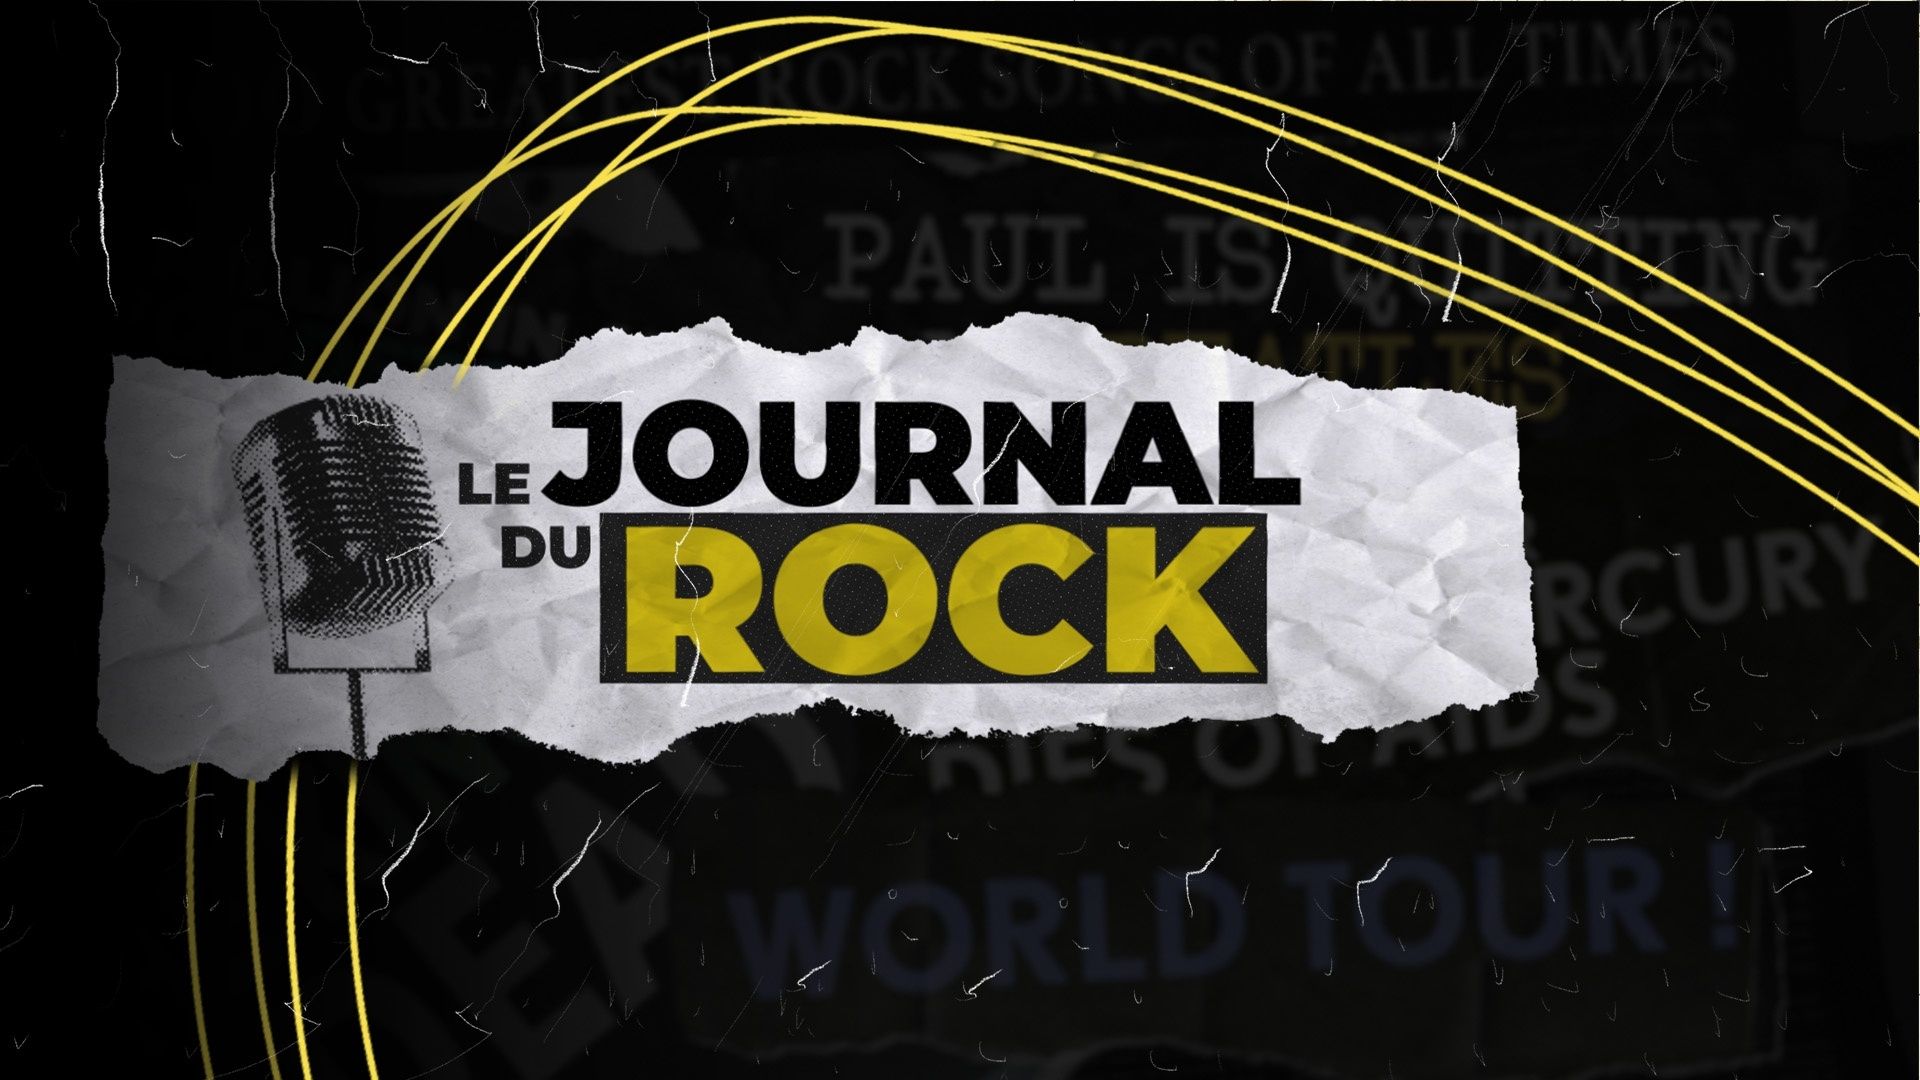 Le Journal Du Rock – Amy Winehouse ; Oasis ; The Final Dinner Party et les Sparks ; Green Day ; Noel Gallagher, les Excessive Flying Birds et Oasis – Auvio